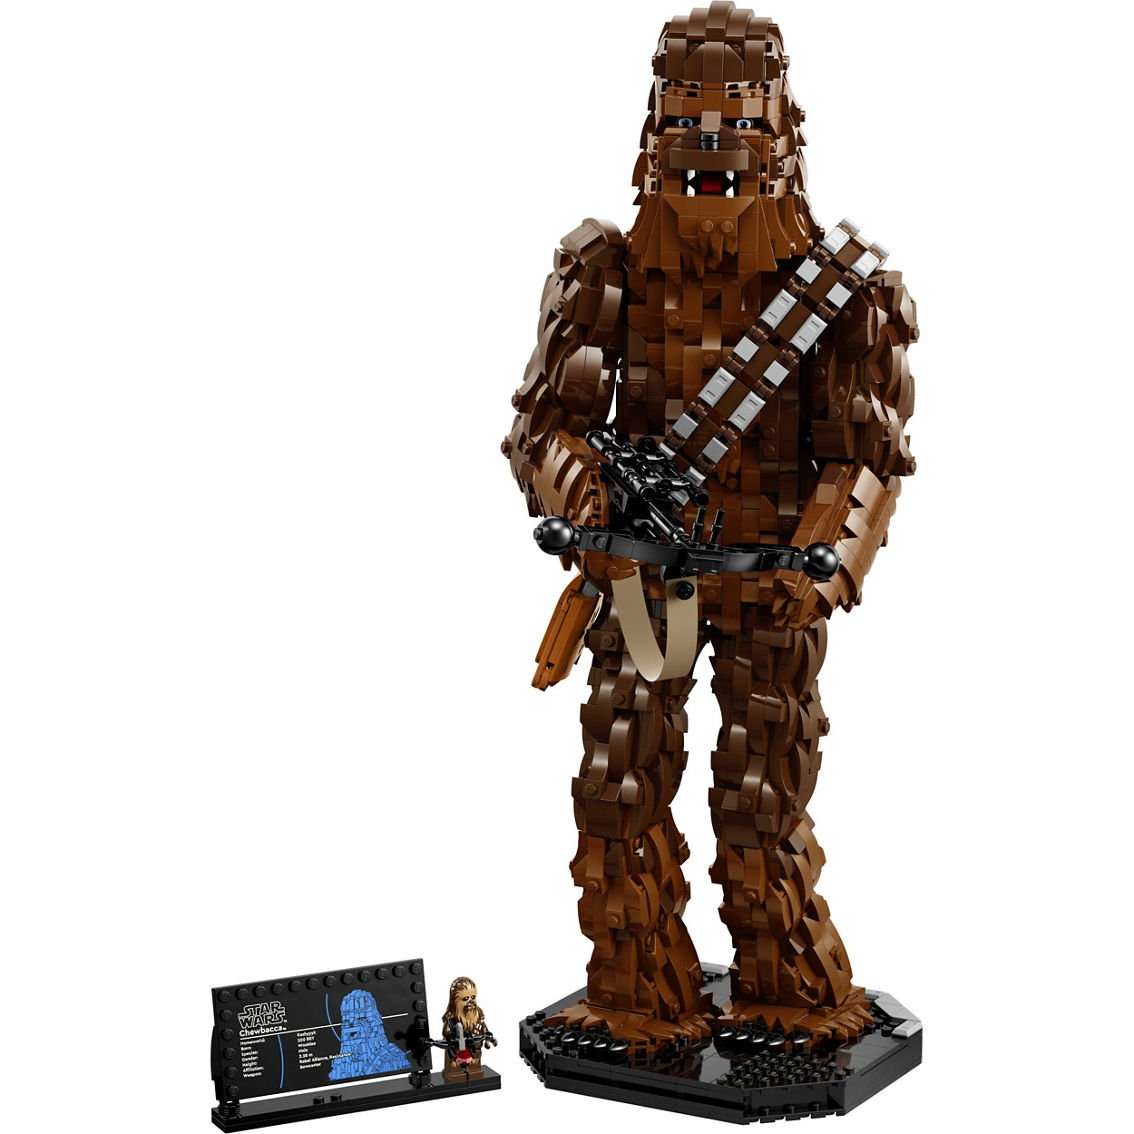 LEGO Star Wars Chewbacca Figure Building Set for Adults 75371 - Image 4 of 10